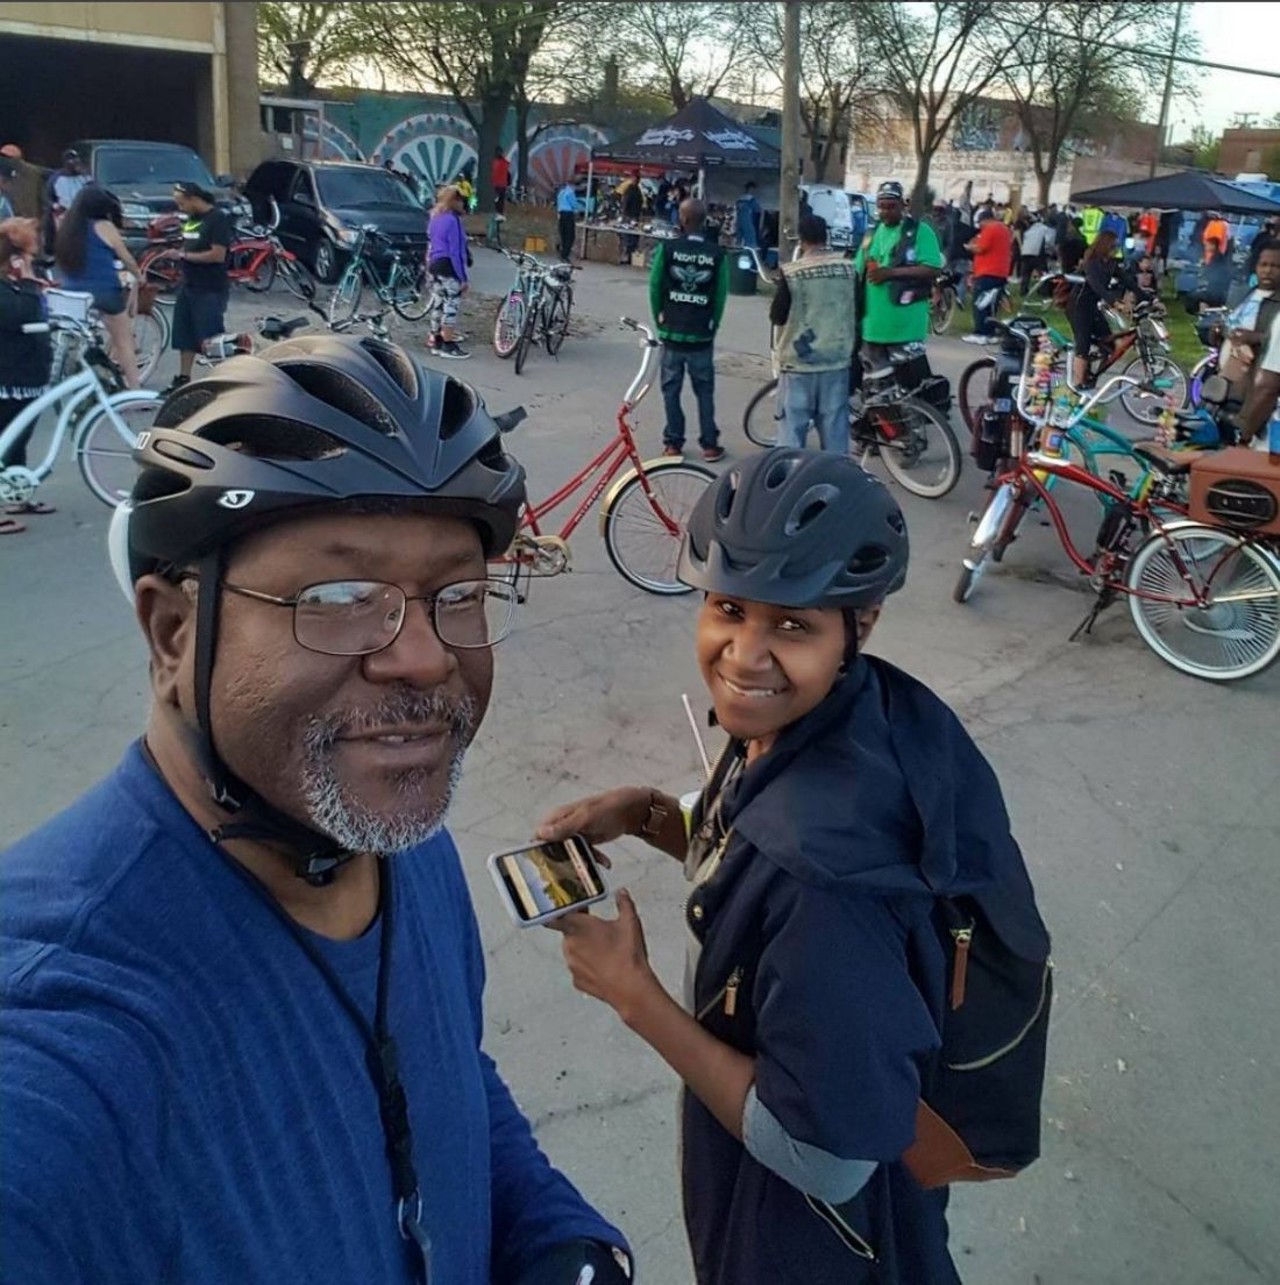 Slow Roll 
Every Monday night in the warmer months, the streets fill with thousands of locals who careen through the city on two wheels. A Slow Roll selfie proves you're not afraid to explore the city, but you'd rather do it with an army of fellow cyclists.
Photo via Instagram, rexfordimages 